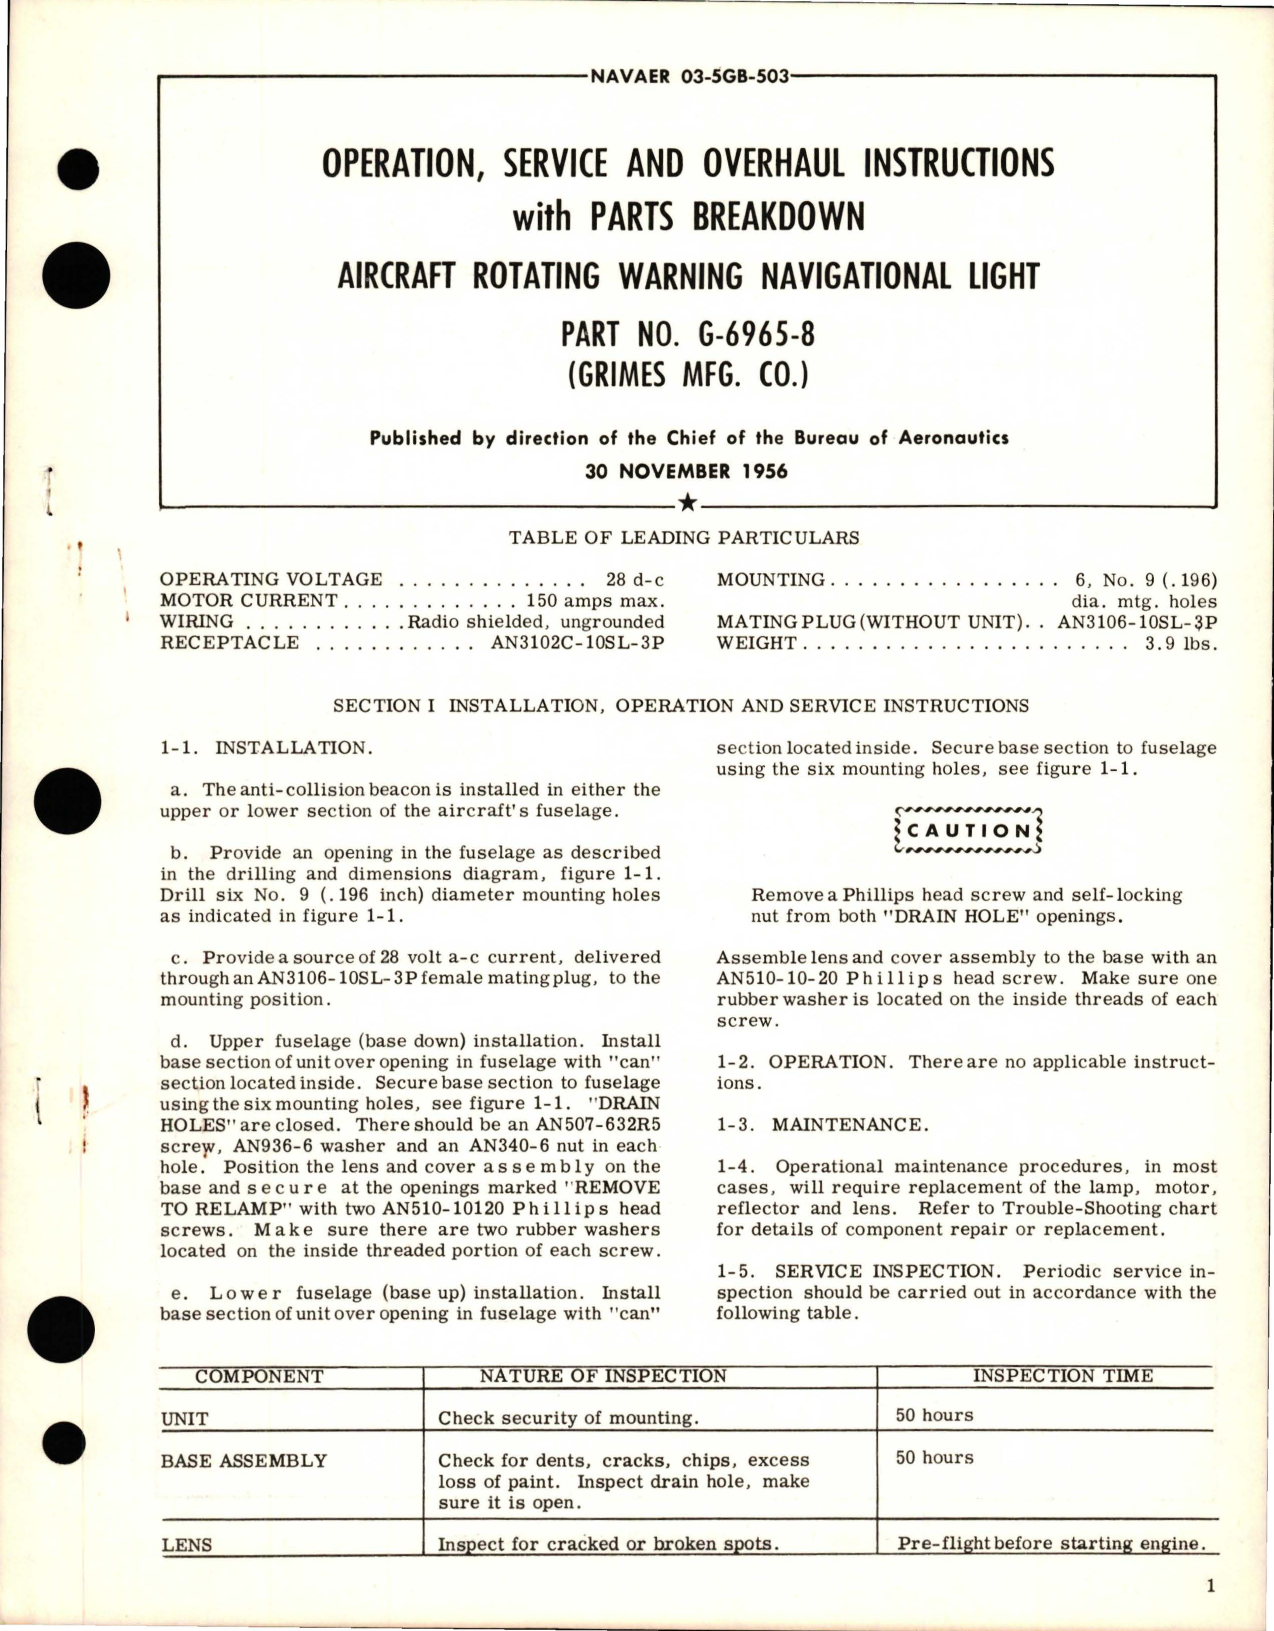 Sample page 1 from AirCorps Library document: Operation, Service and Overhaul Instructions with Parts Breakdown for Rotating Warning Navigational Light - Part G-6965-8